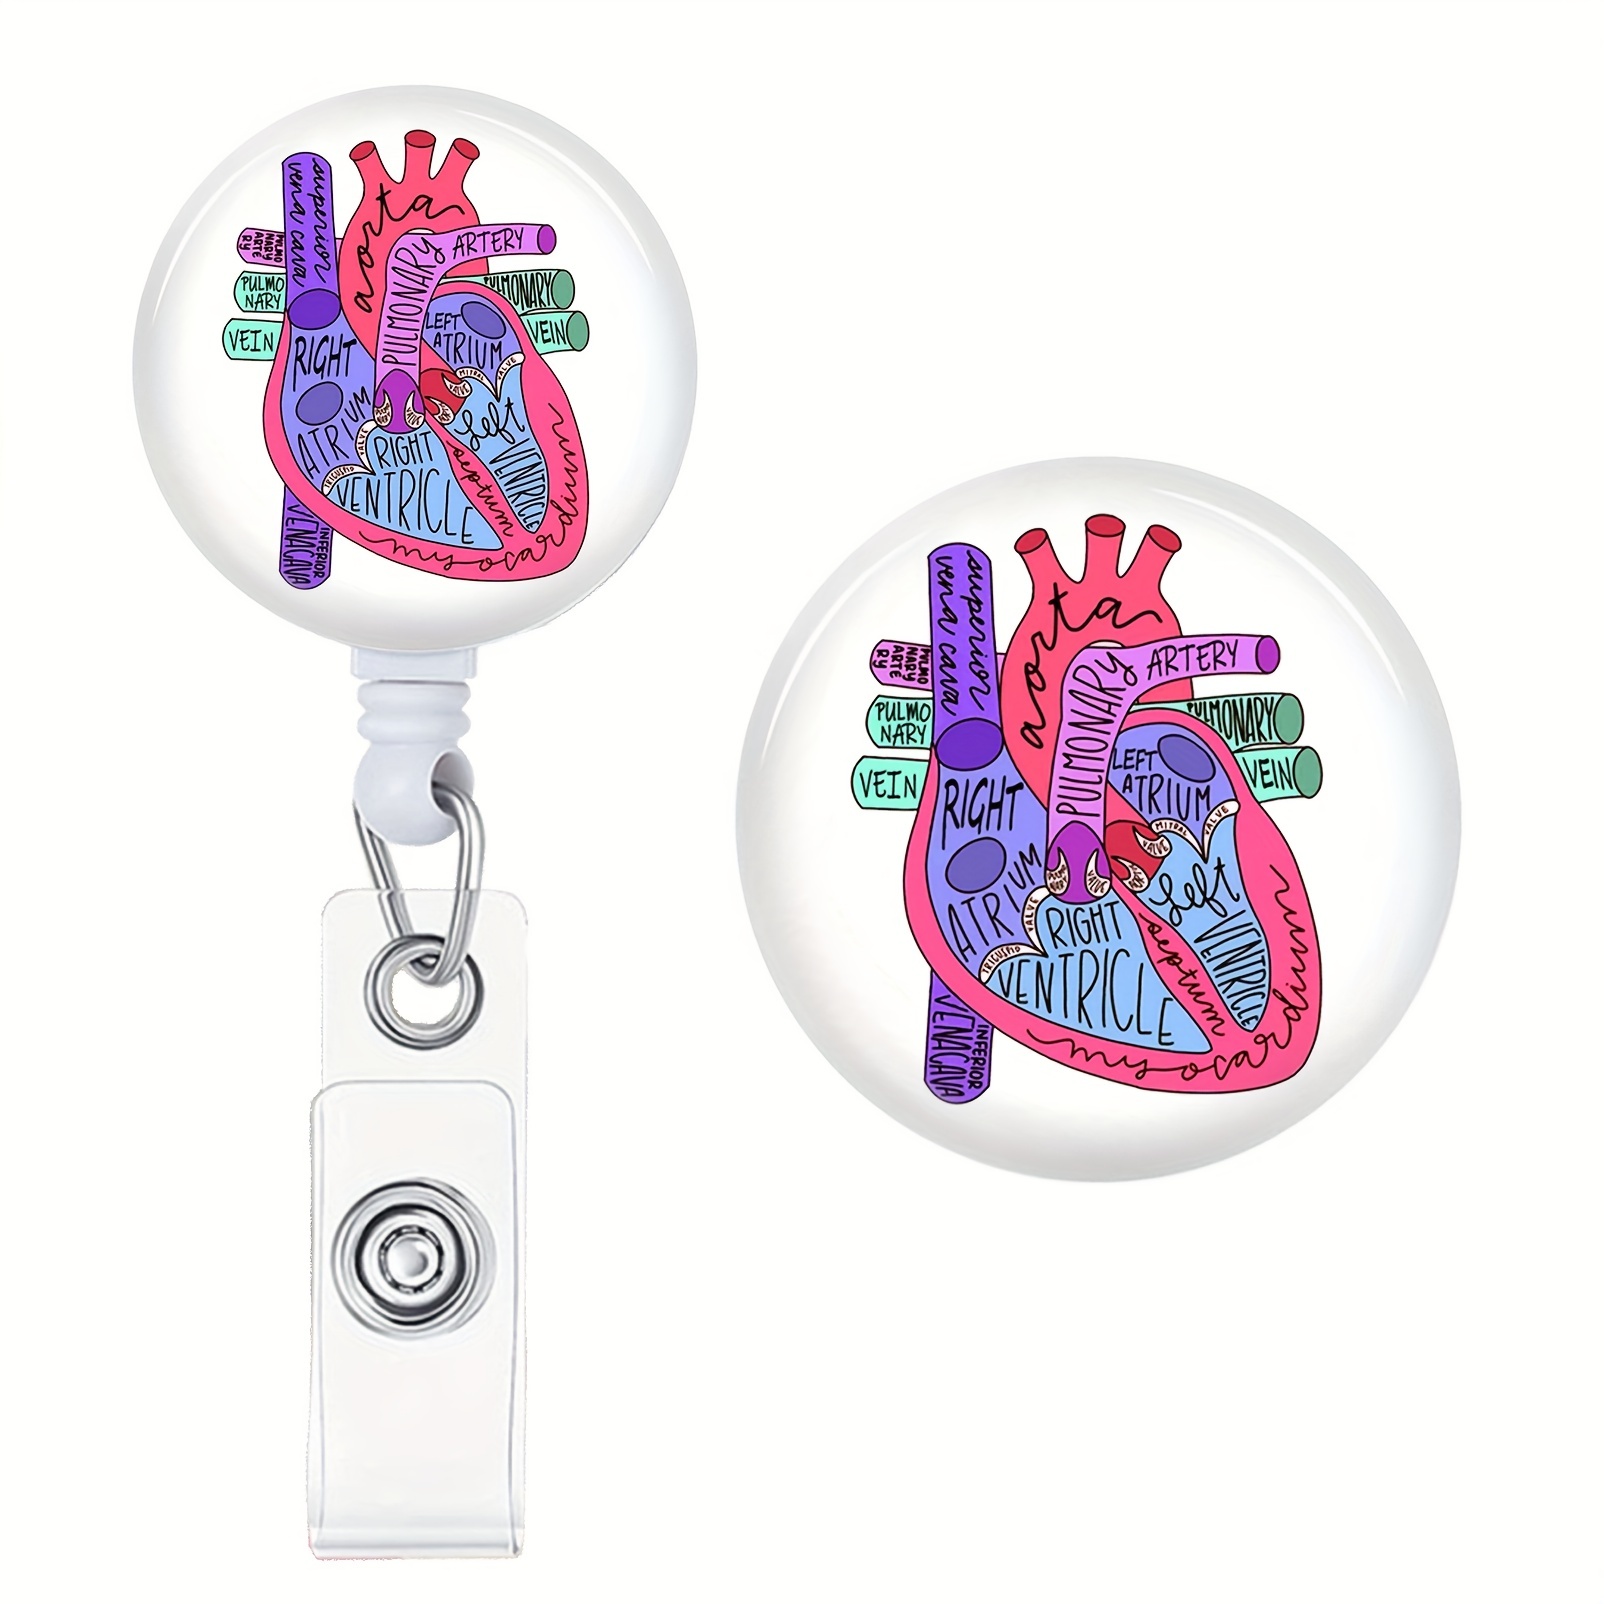 Cute & Funny Retractable Nurse Badge Reels - Perfect for Your Name Tag!